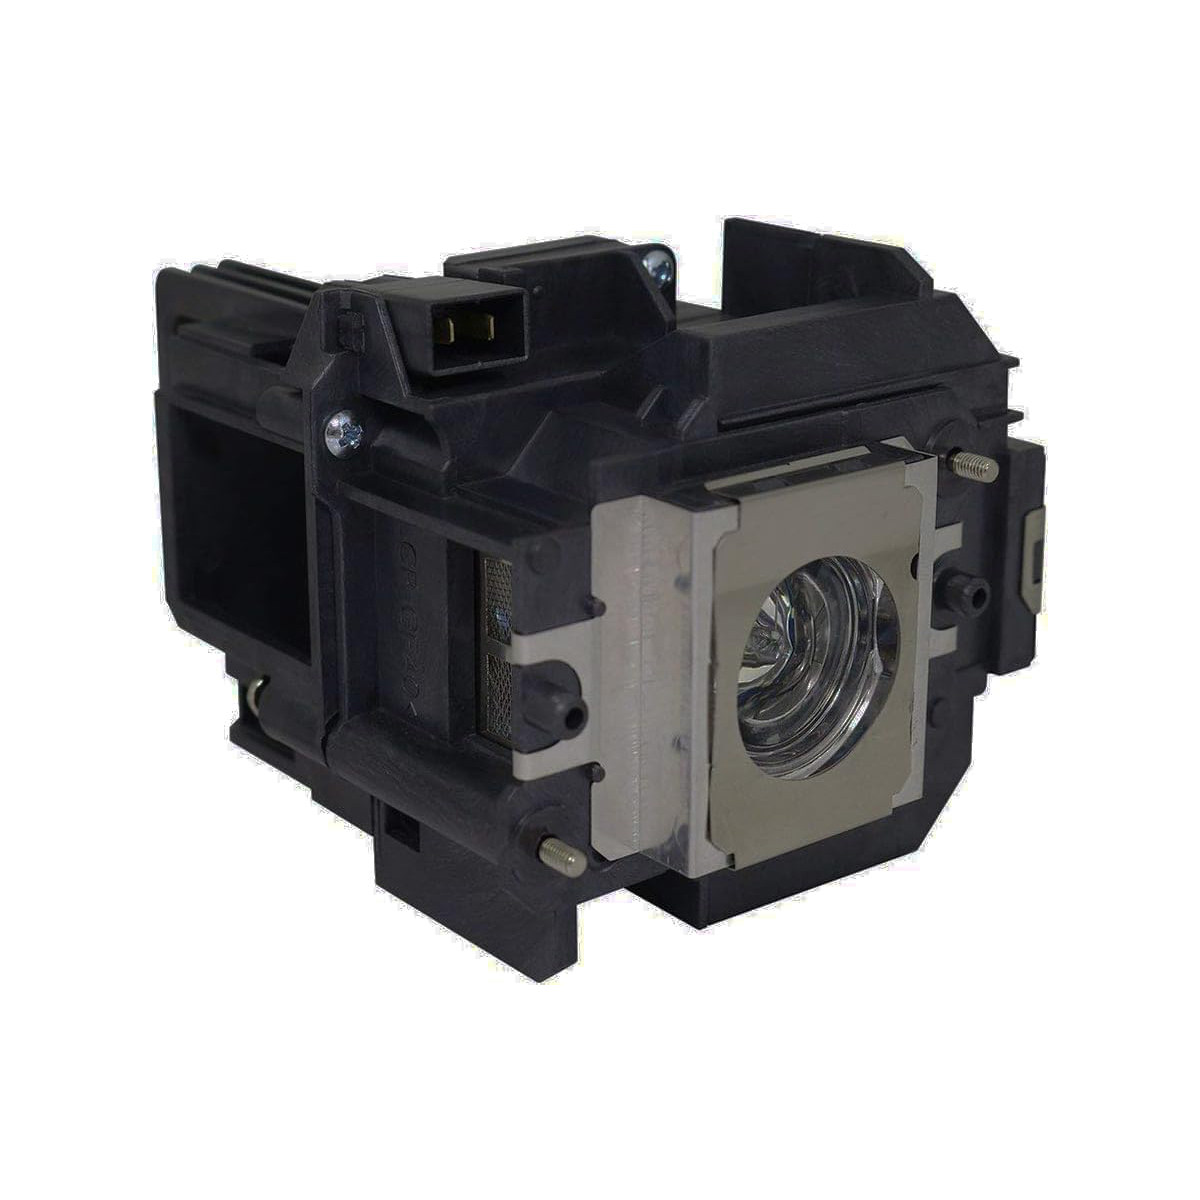 Replacement Projector lamp ELPLP59 For Epson EH-R1000 EH-R2000 EH-R4000